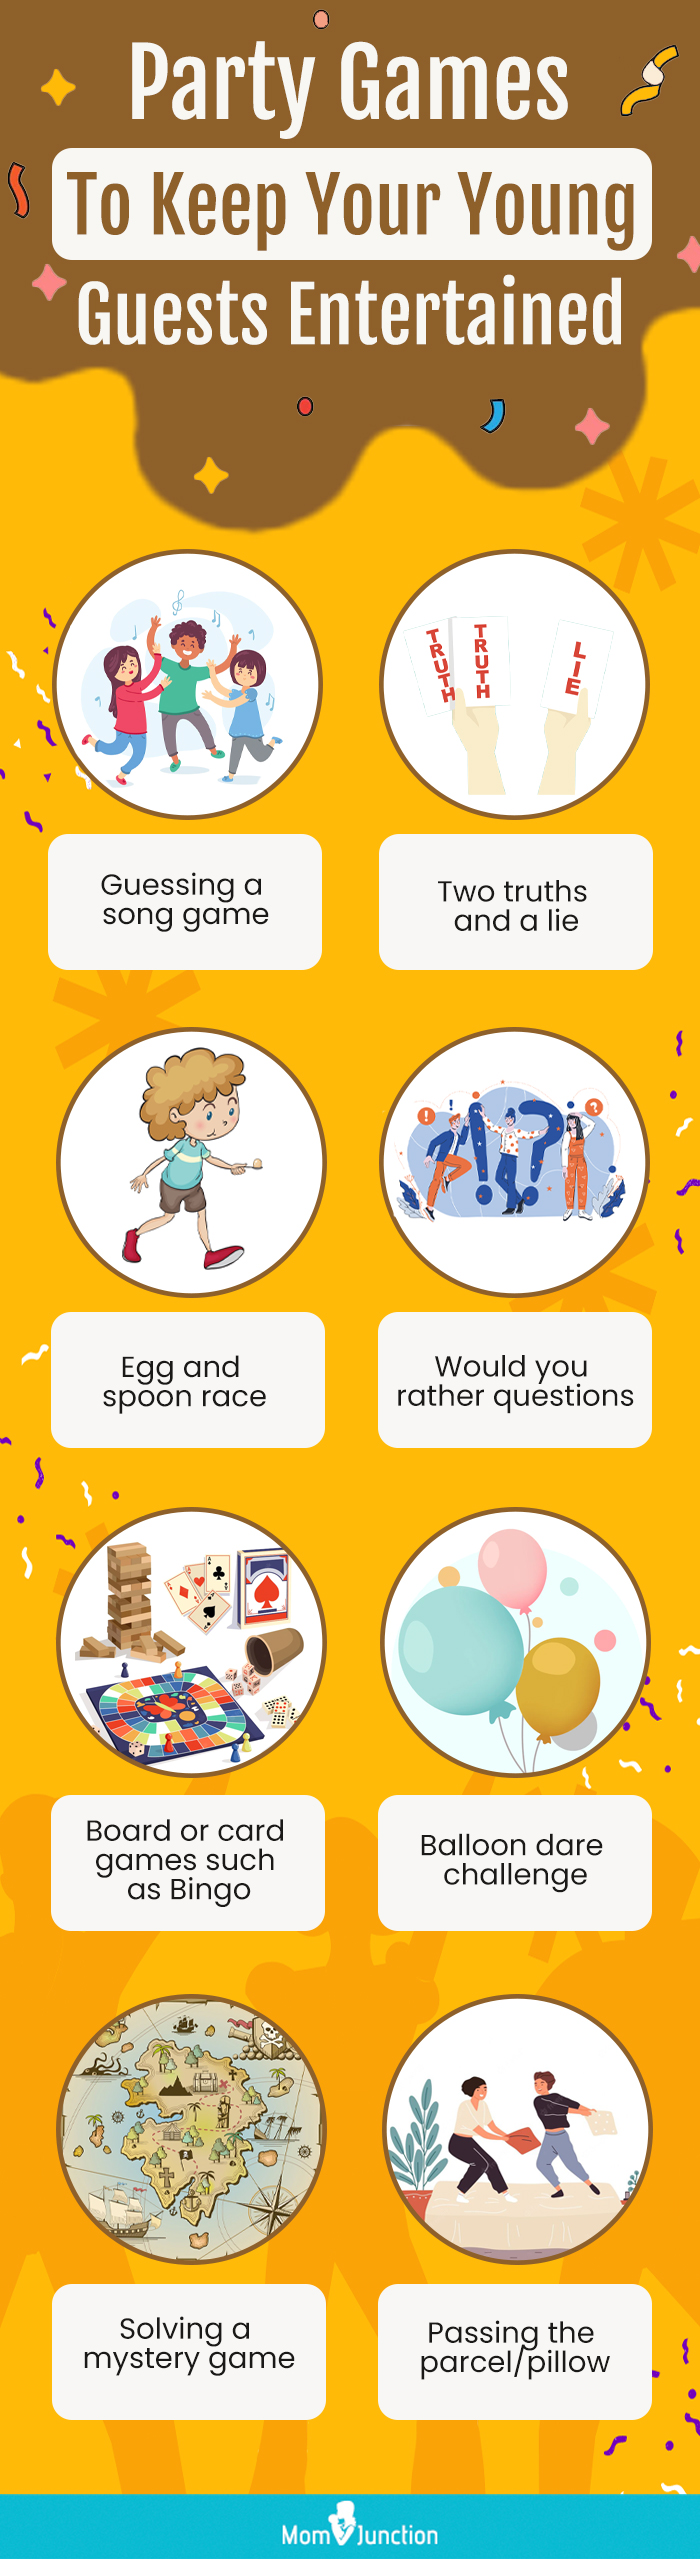 party games to keep your young guests entertained (infographic)